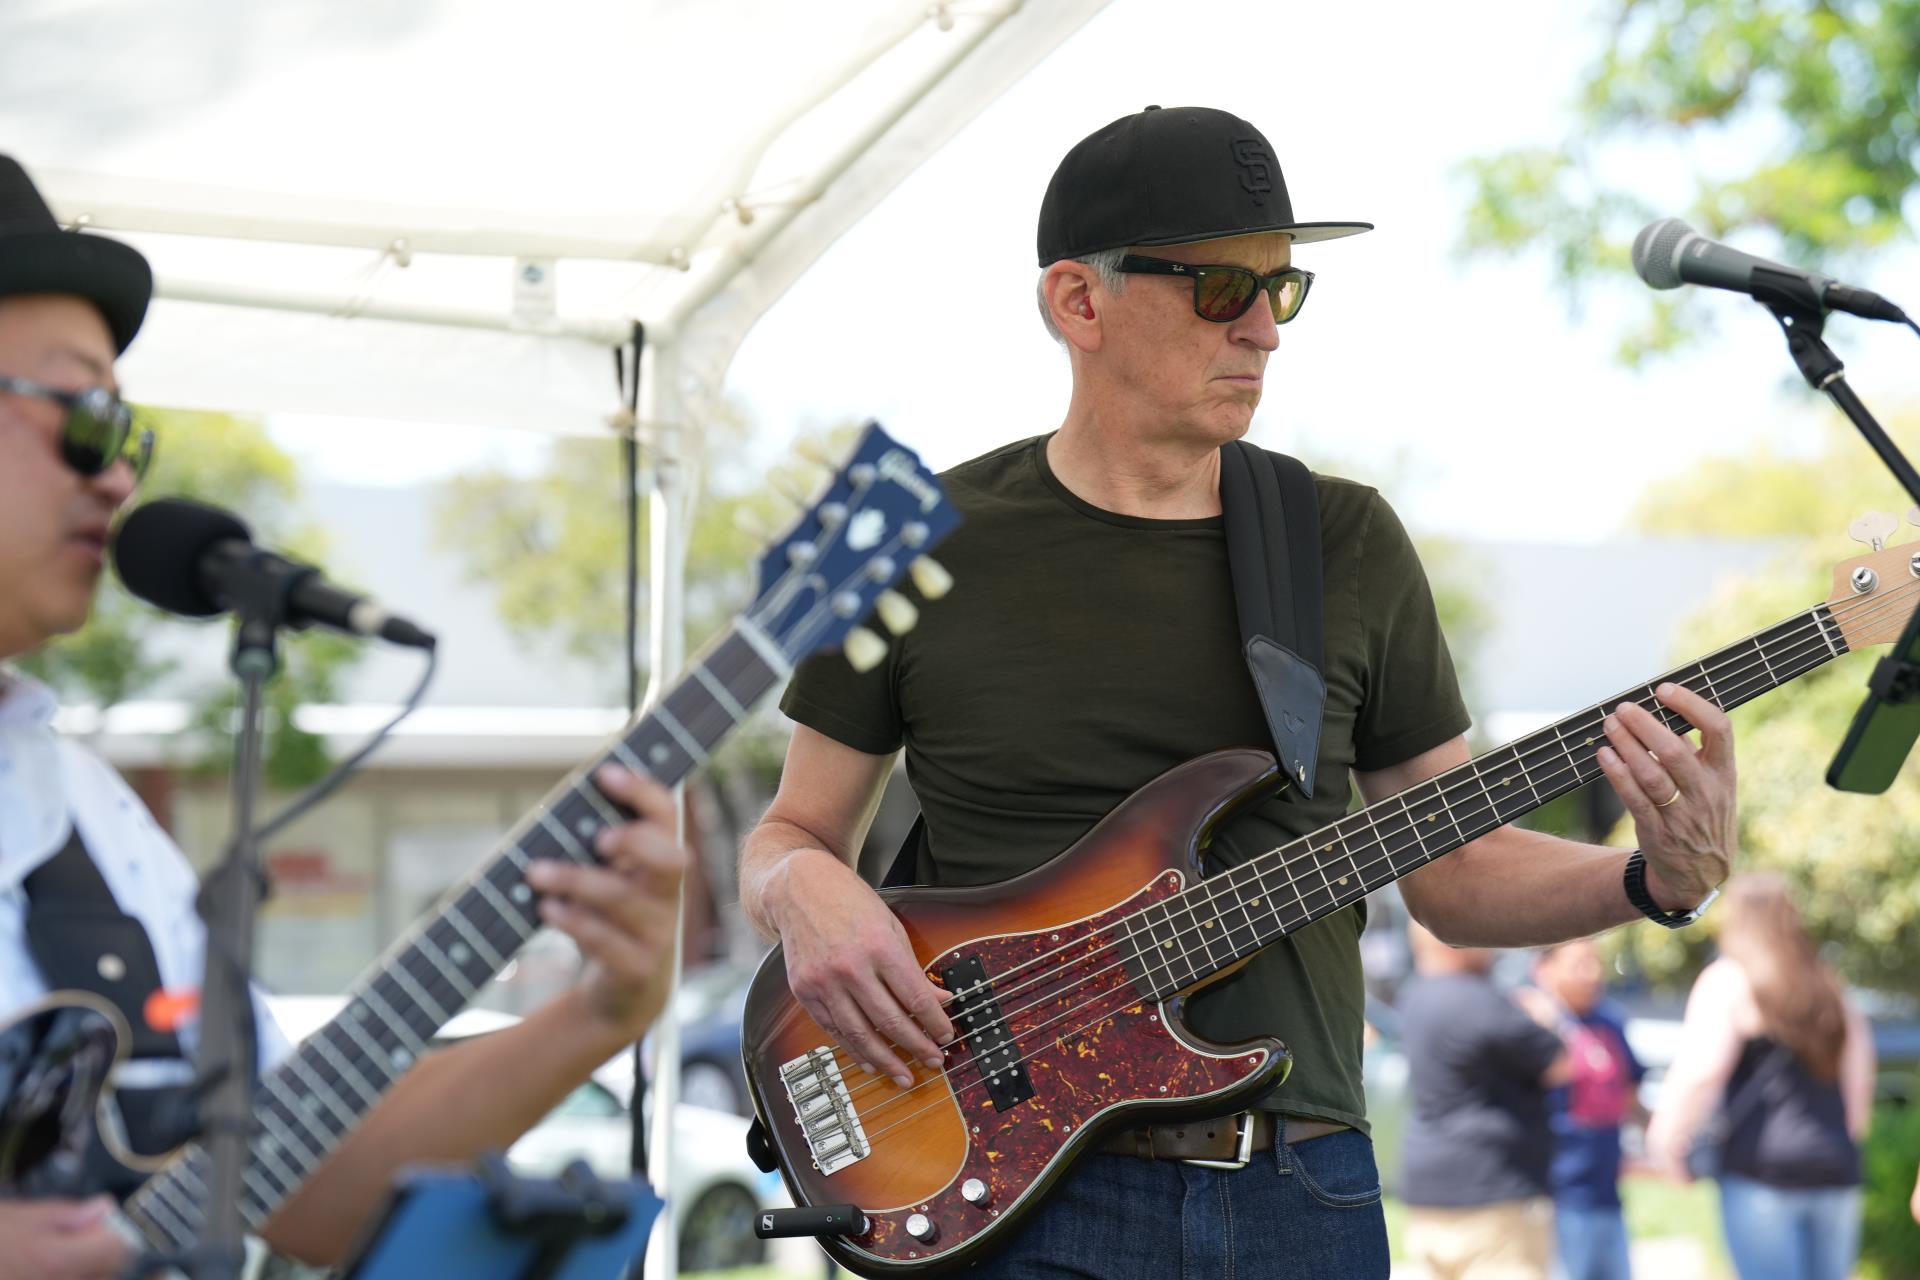 Bass player grooving at BBB Fest